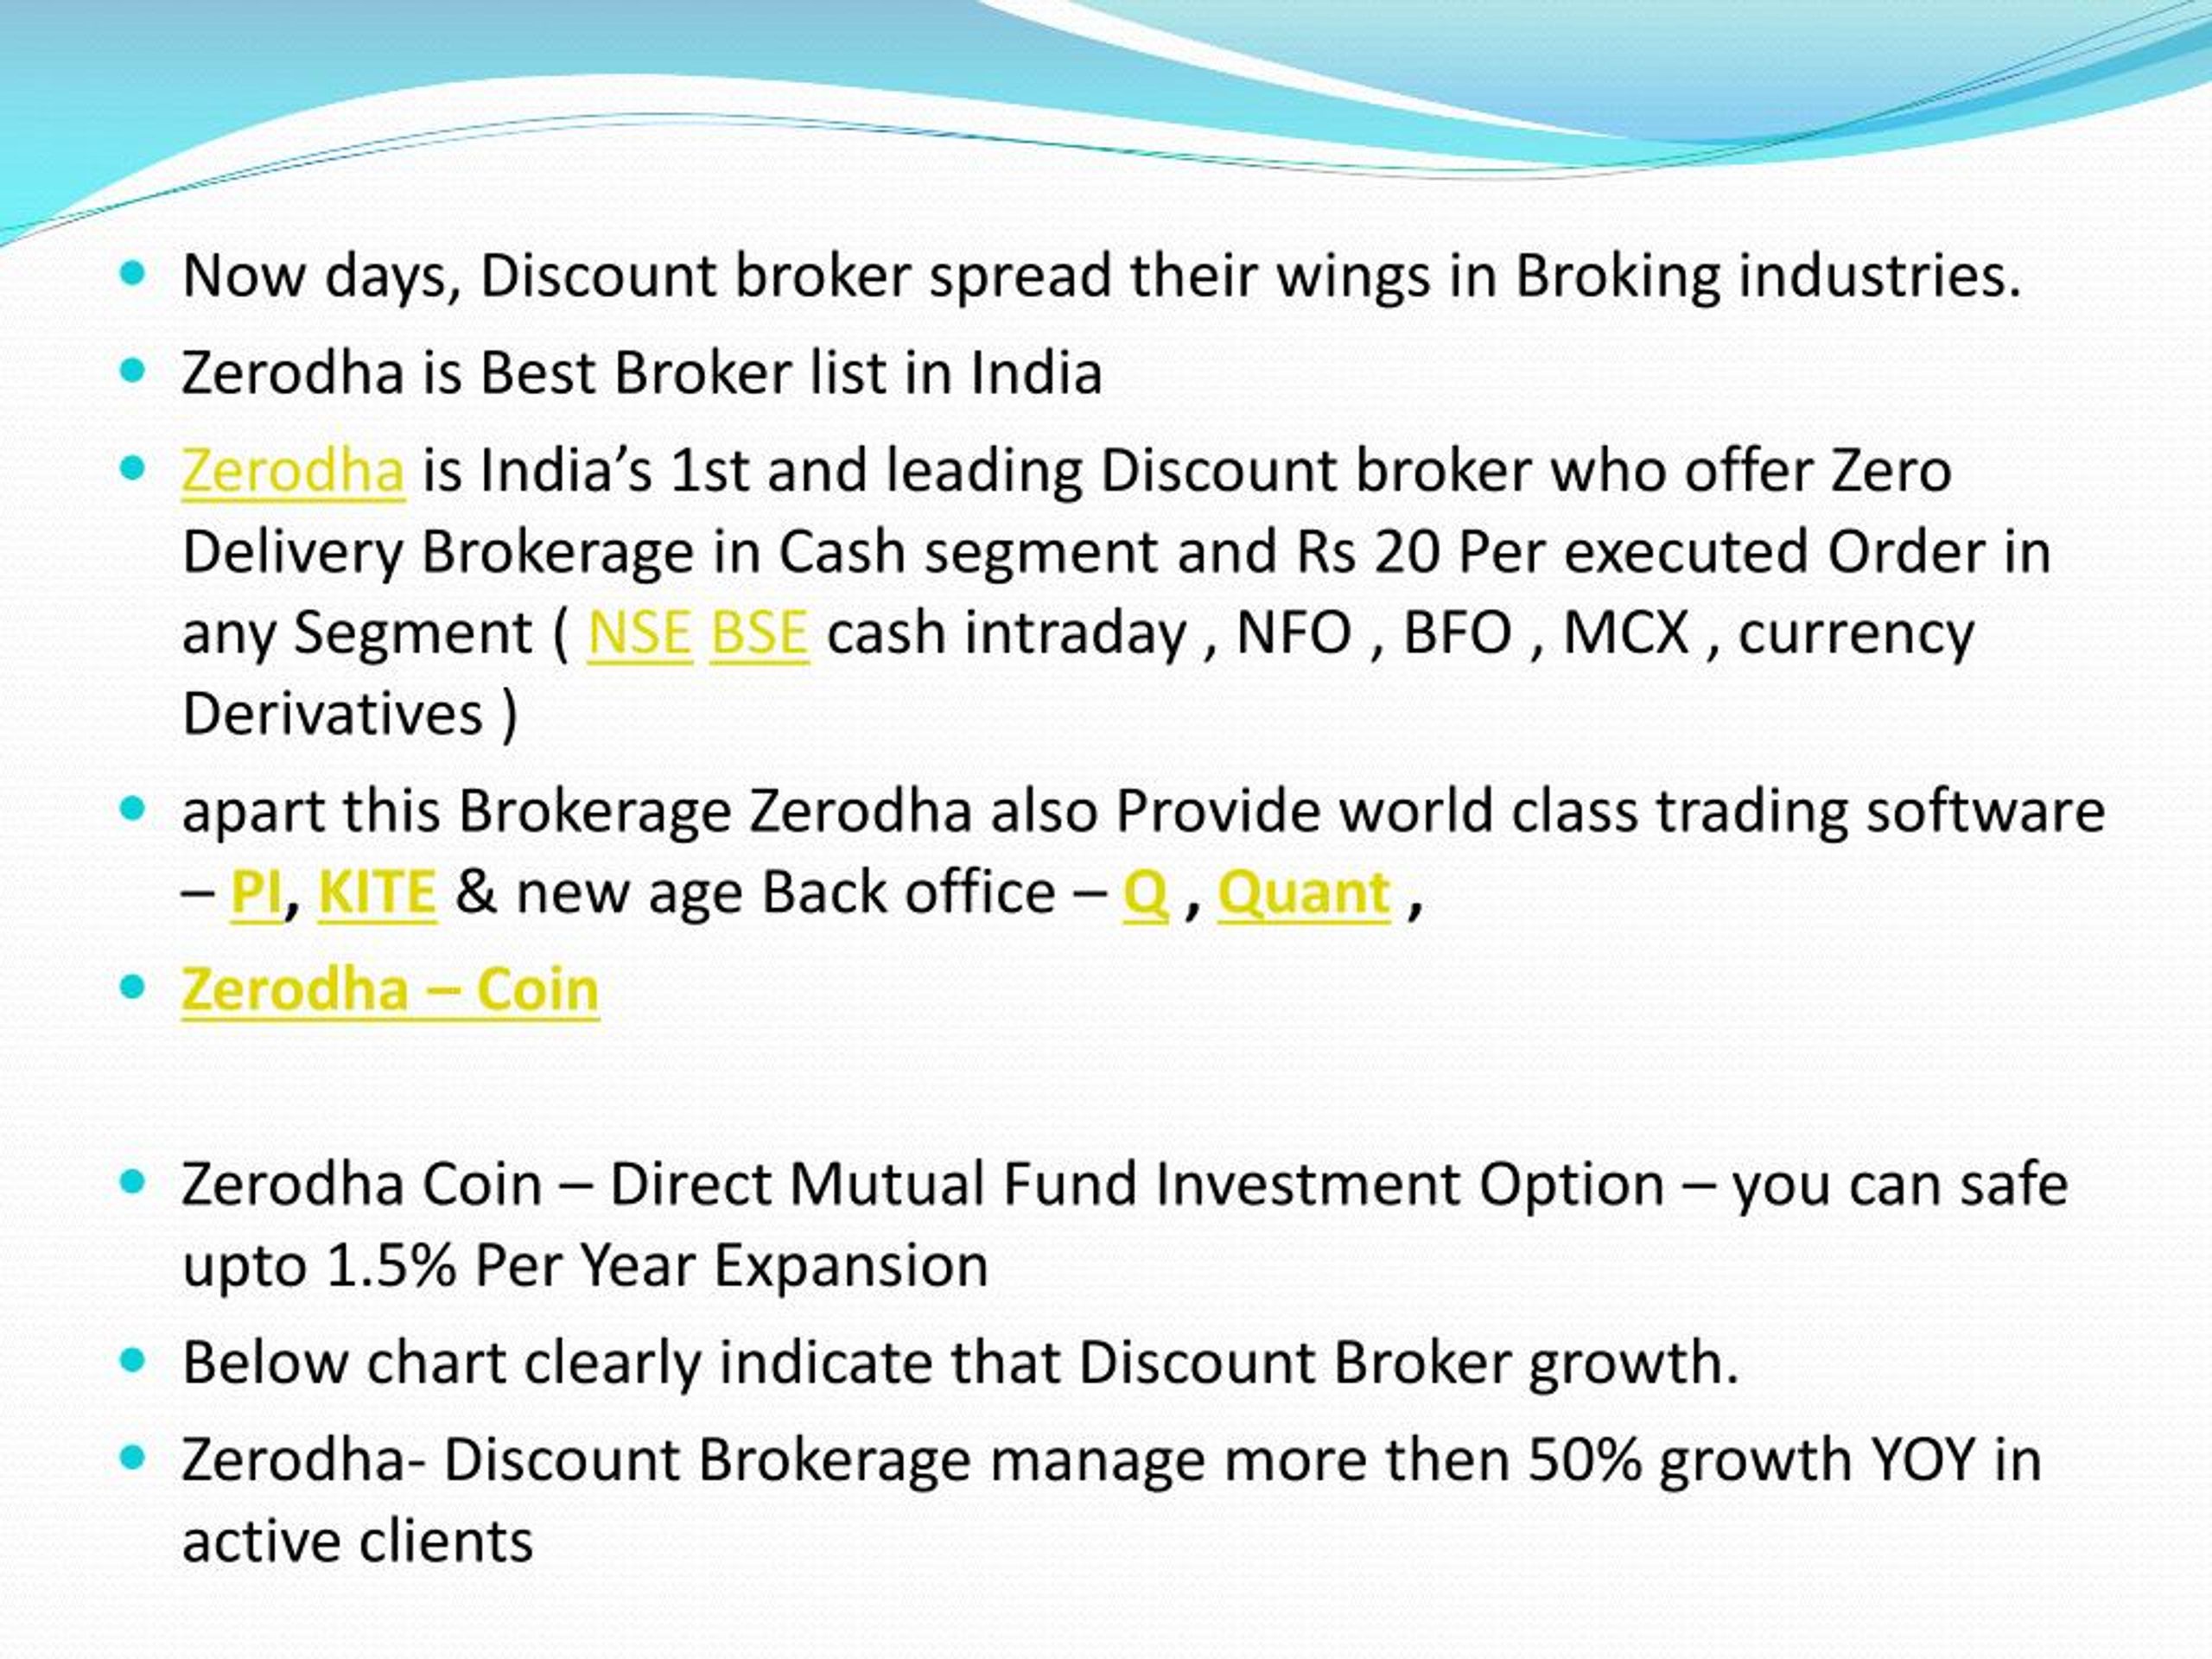 Ppt Compare Brokerage Charges By Investallign Powerpoint Presentation Id8027470 8434